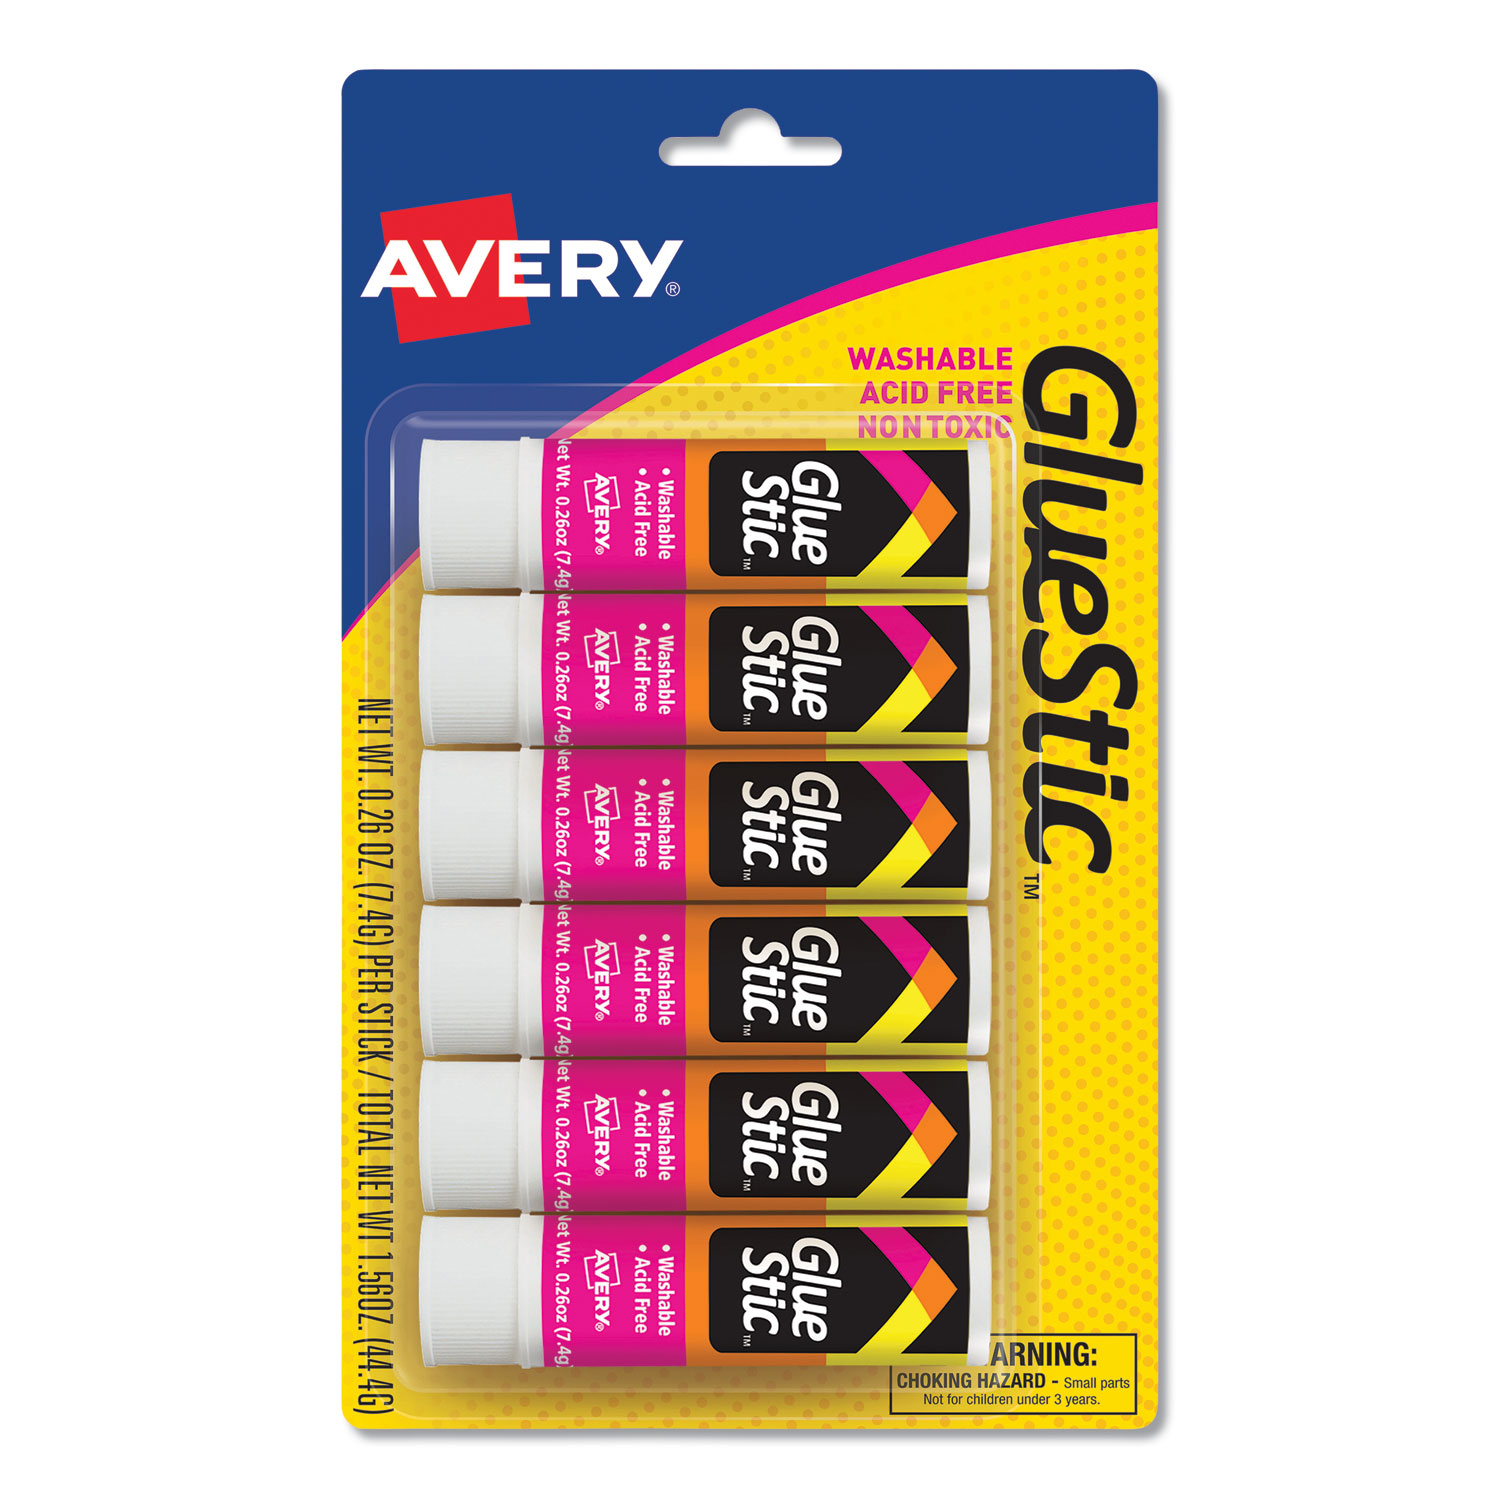  Avery 98095 Permanent Glue Stic Value Pack, 0.26 oz, Applies White, Dries Clear, 6/Pack (AVE98095) 